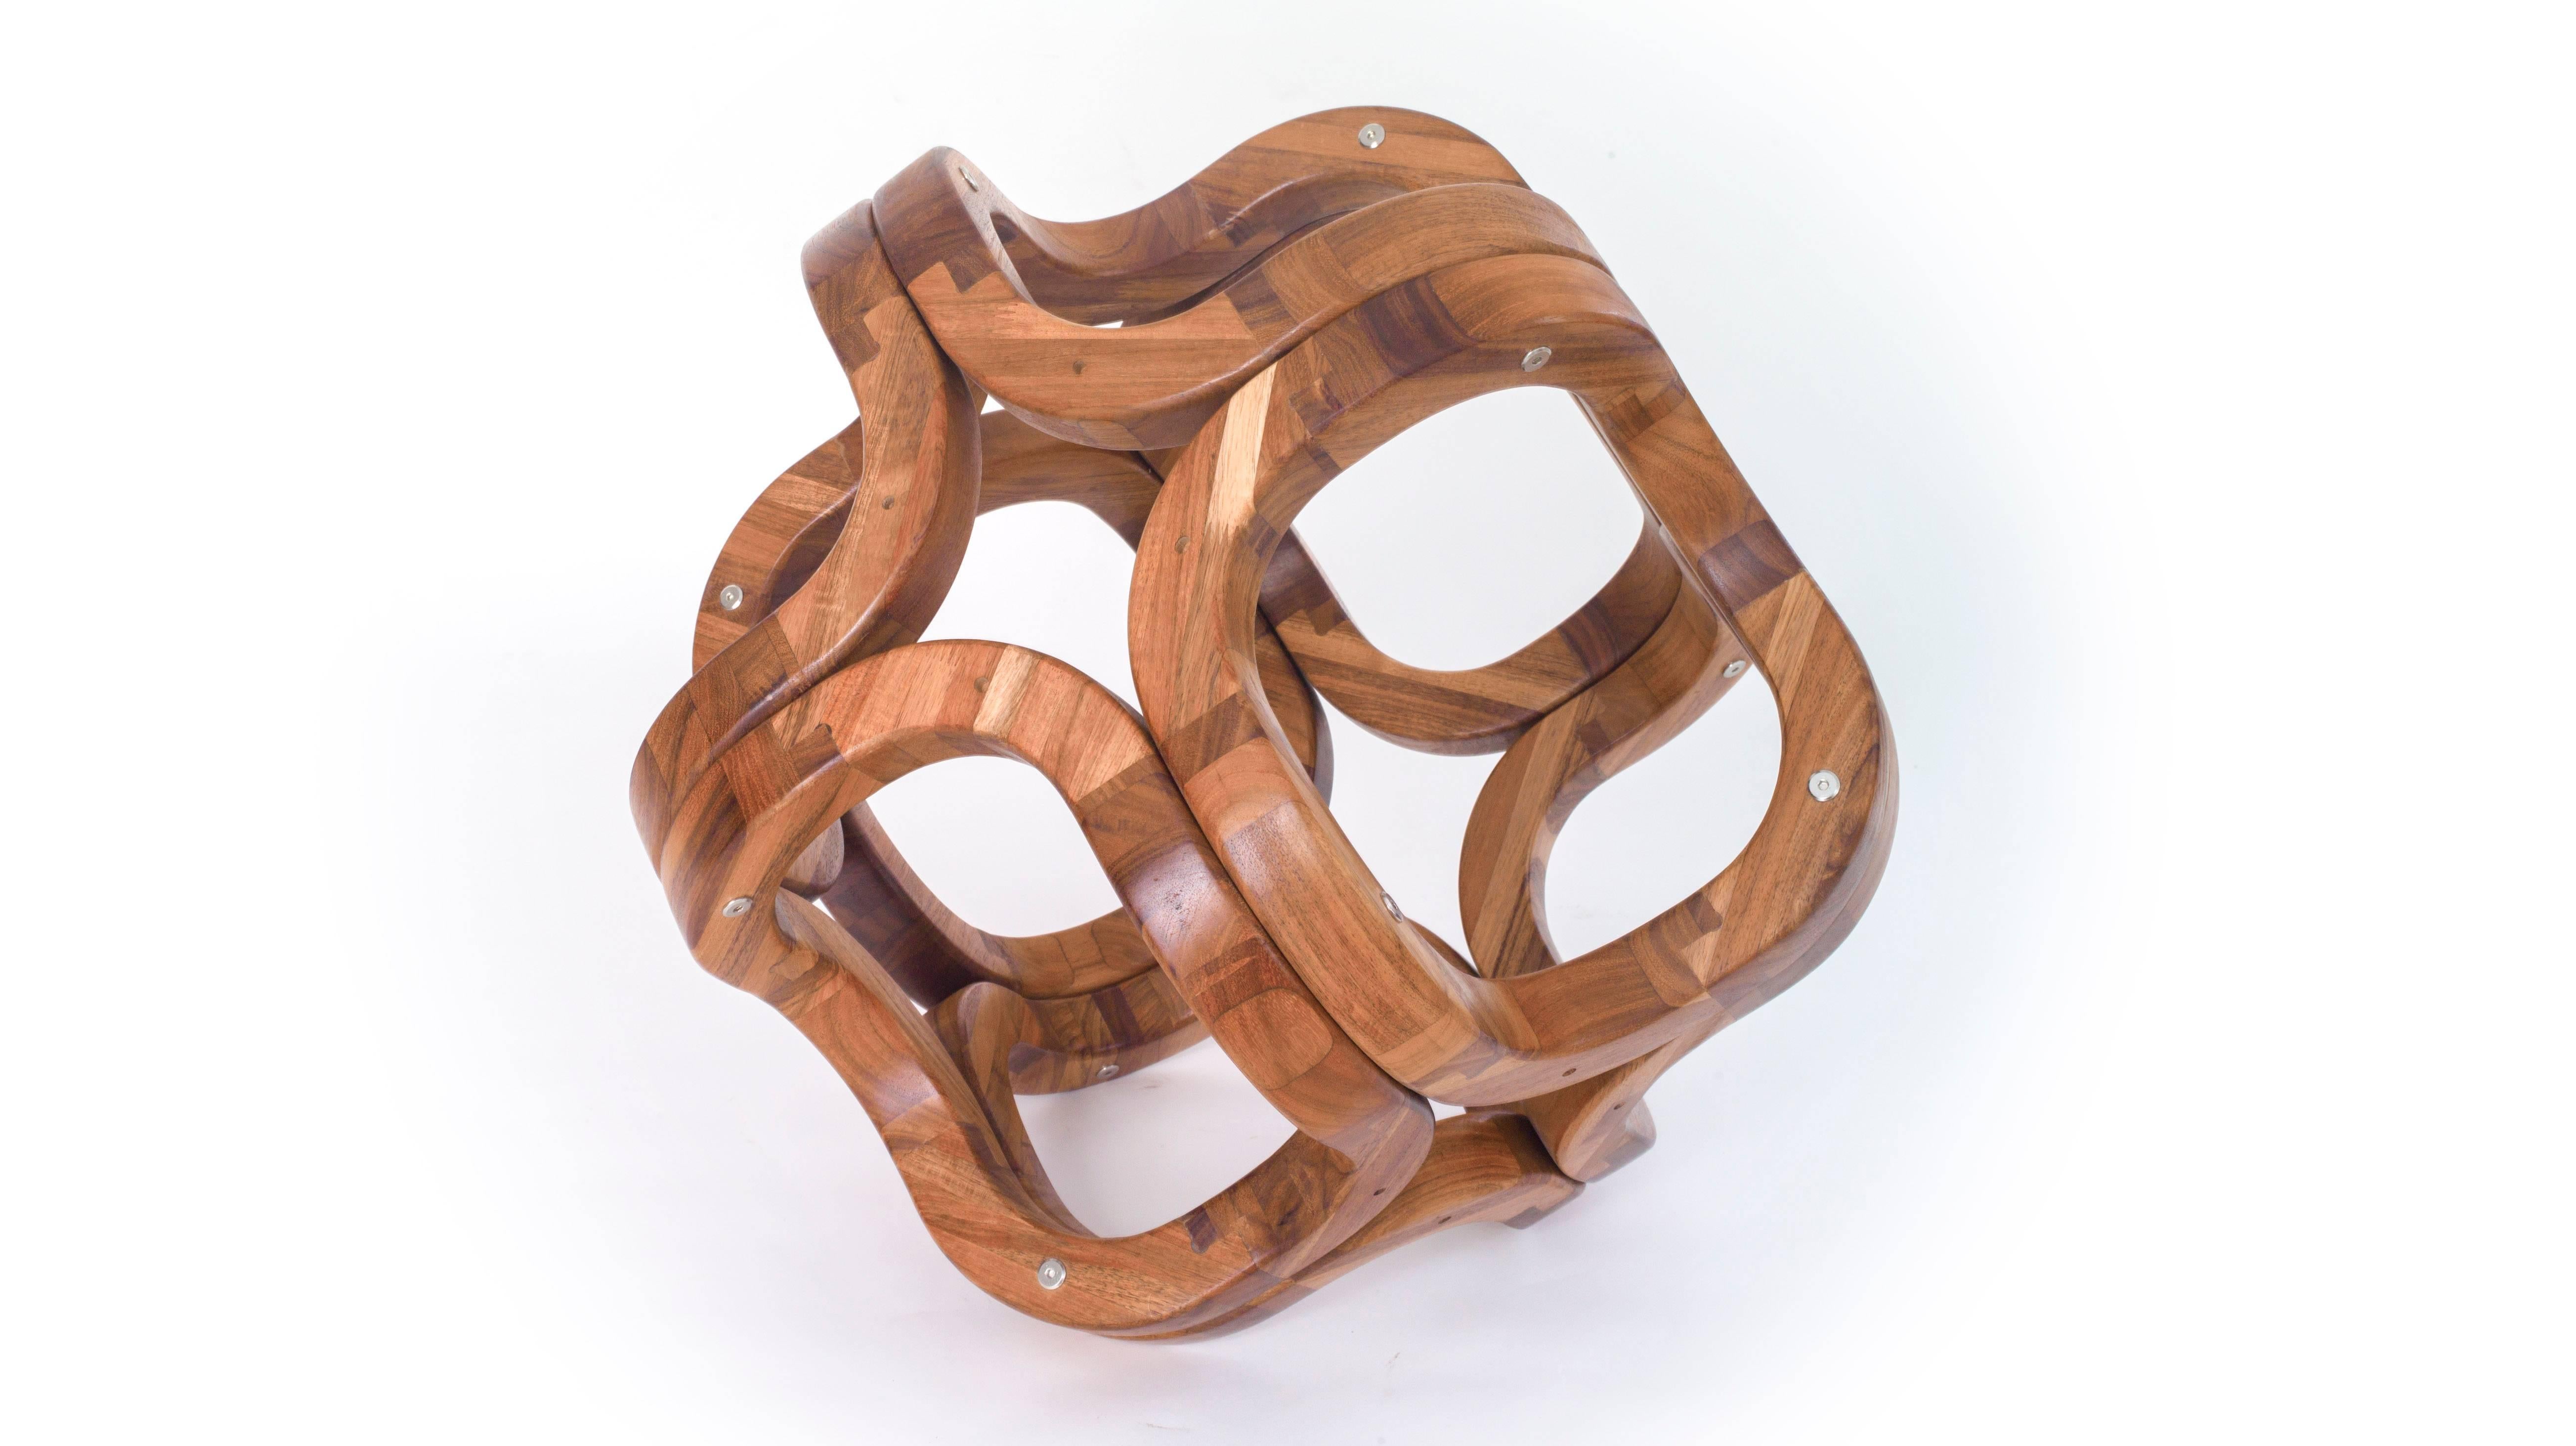 Contemporary Mexican Sculpture in Handcrafted Tzalam Wood Geometric Octahedron  4